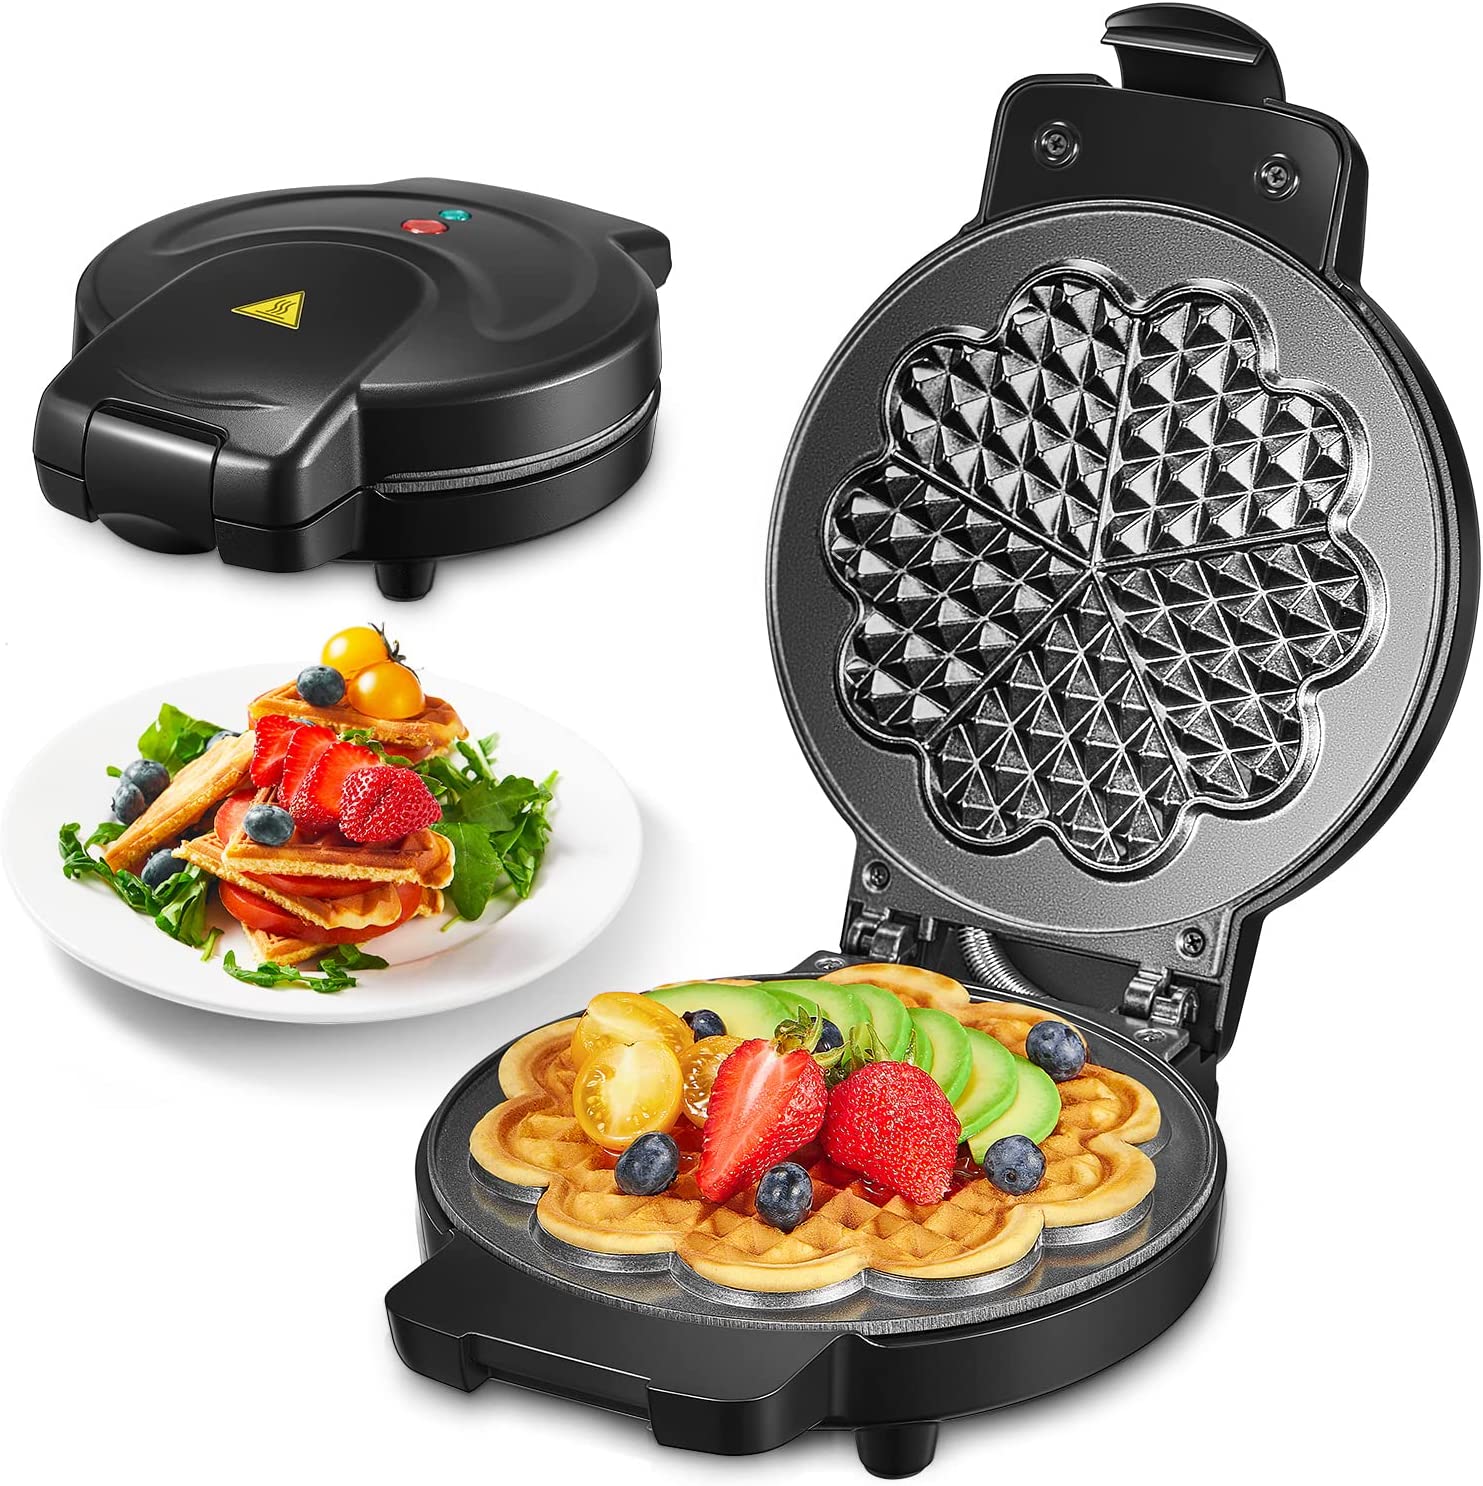 FOHERE WAFFLE INON, HEART SHAPE, 900 W, Waffle Maker with non-Stick Coating, Waffle Size 15.5 cm, Optical Ready-to-Message, Classic Heart Waffle Iron for Family Parties and Christmas